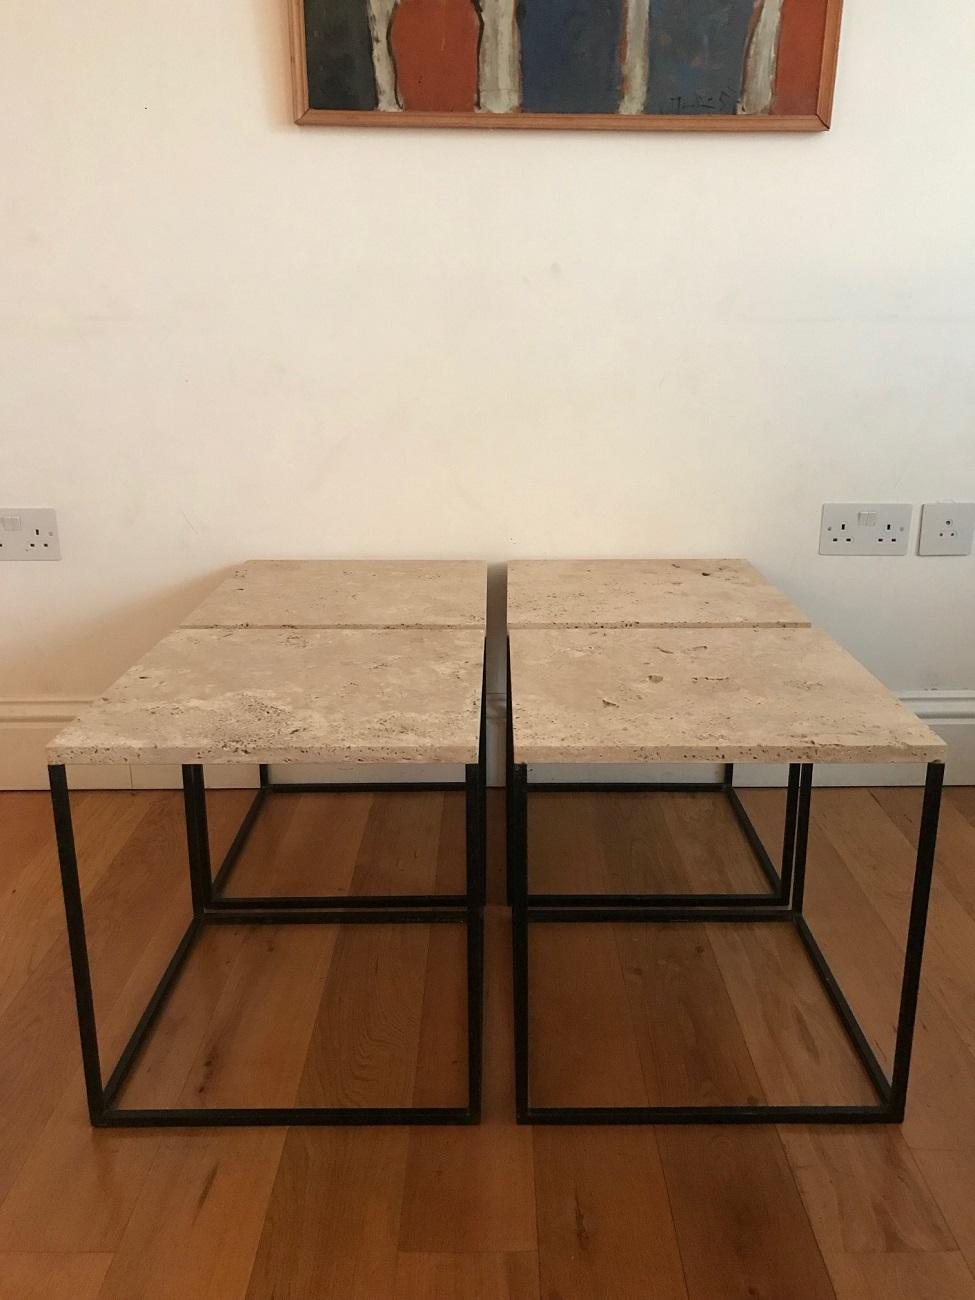 A set of four small black metal and unfilled travertine stone topped side tables, which can be separated or made into one coffee table. French, circa 1950s. The unfilled travertine tops are irregular and have fabulous natural warm feel to them and